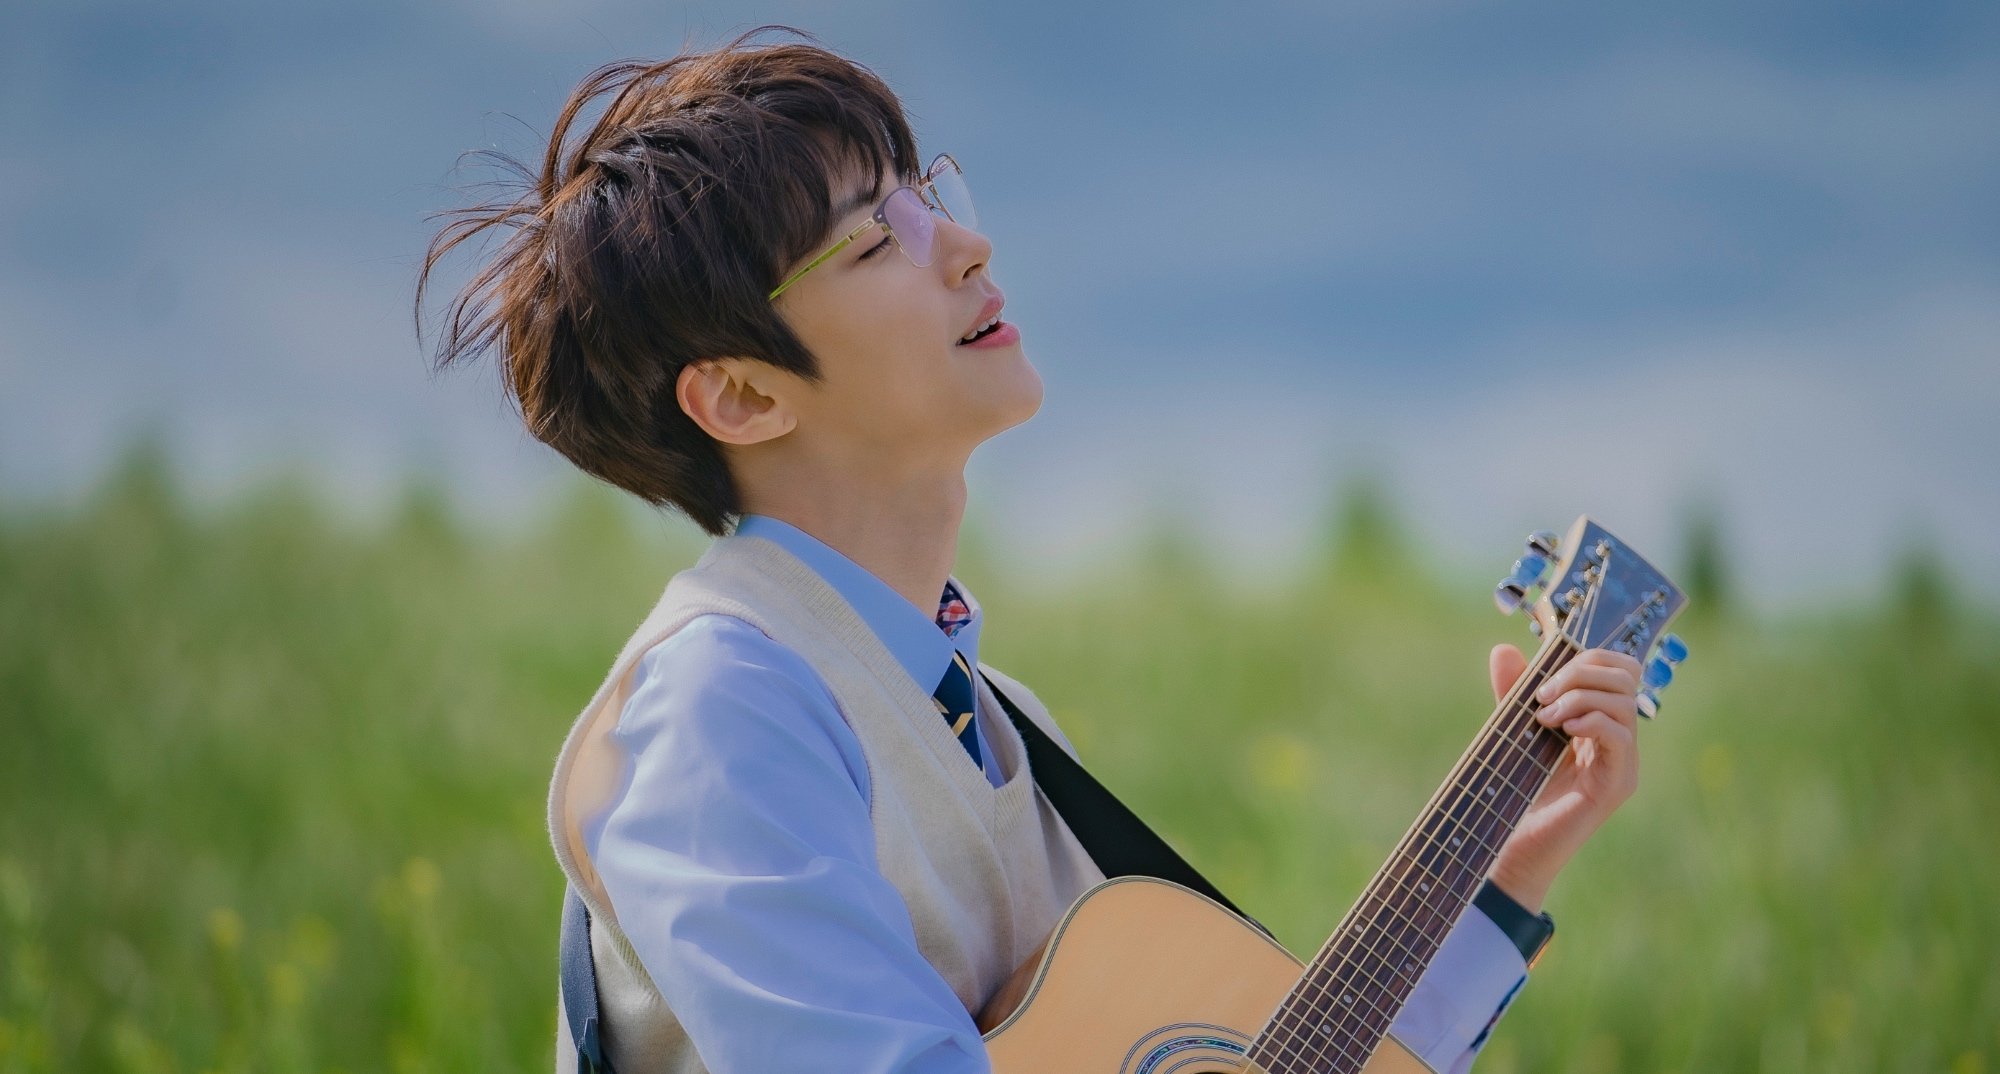 Hwang In-youp in the musical K-drama 'The Sound of Magic' holding a guitar.